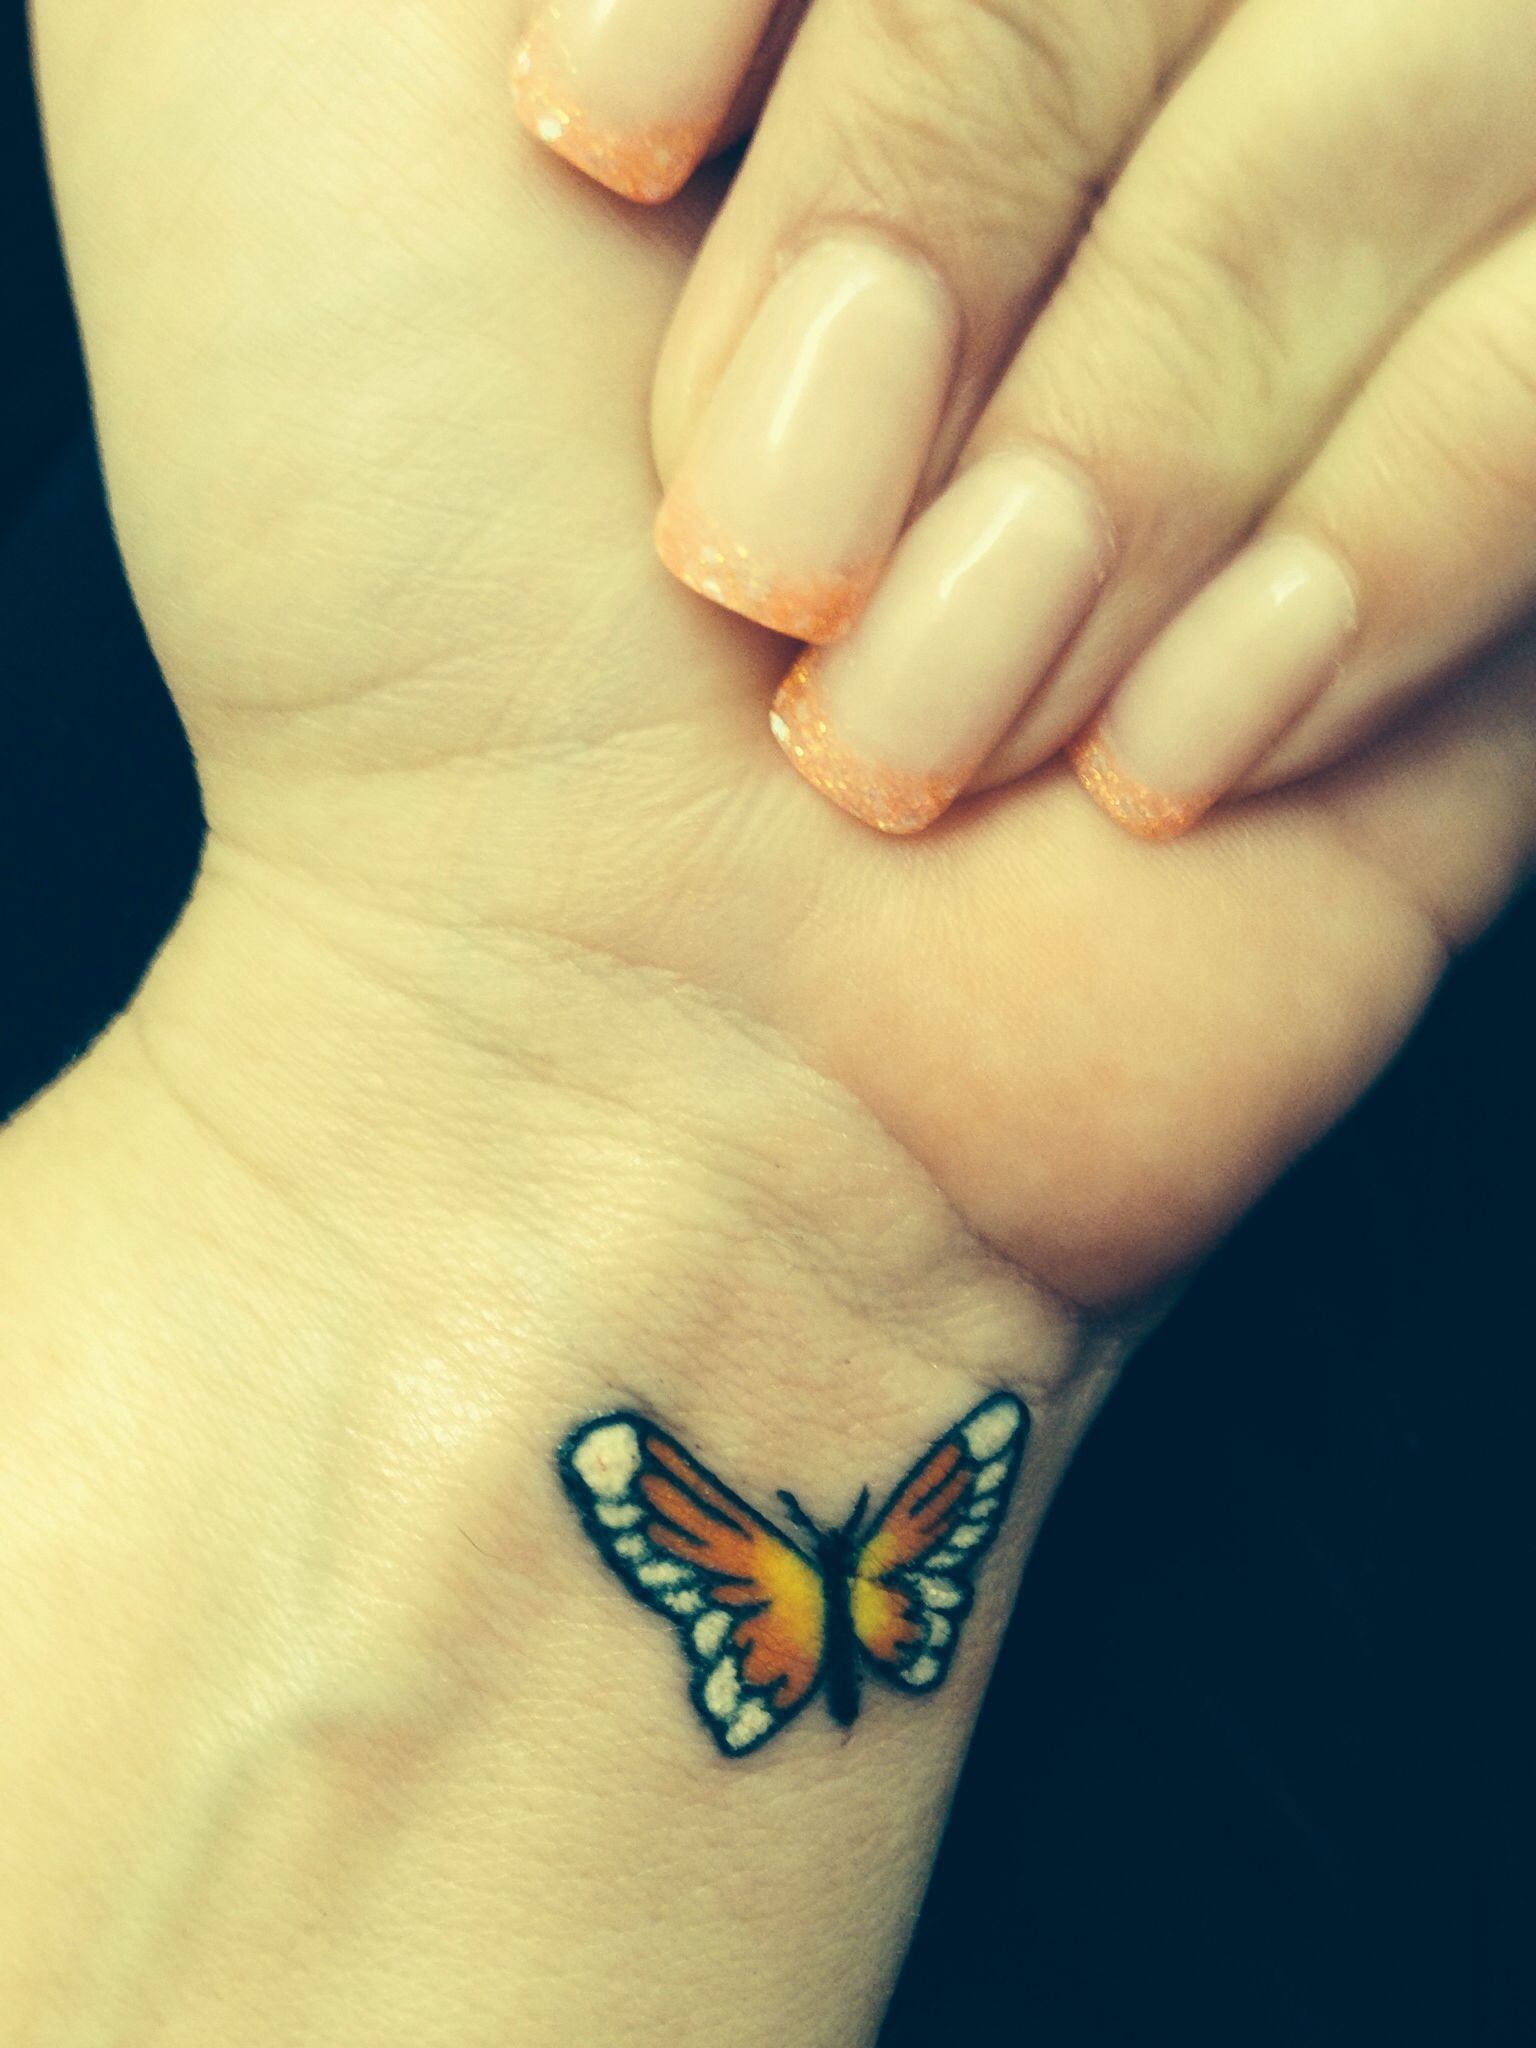 Small Butterfly Tattoo On Wrist Bright Colors Tattoos in size 1536 X 2048